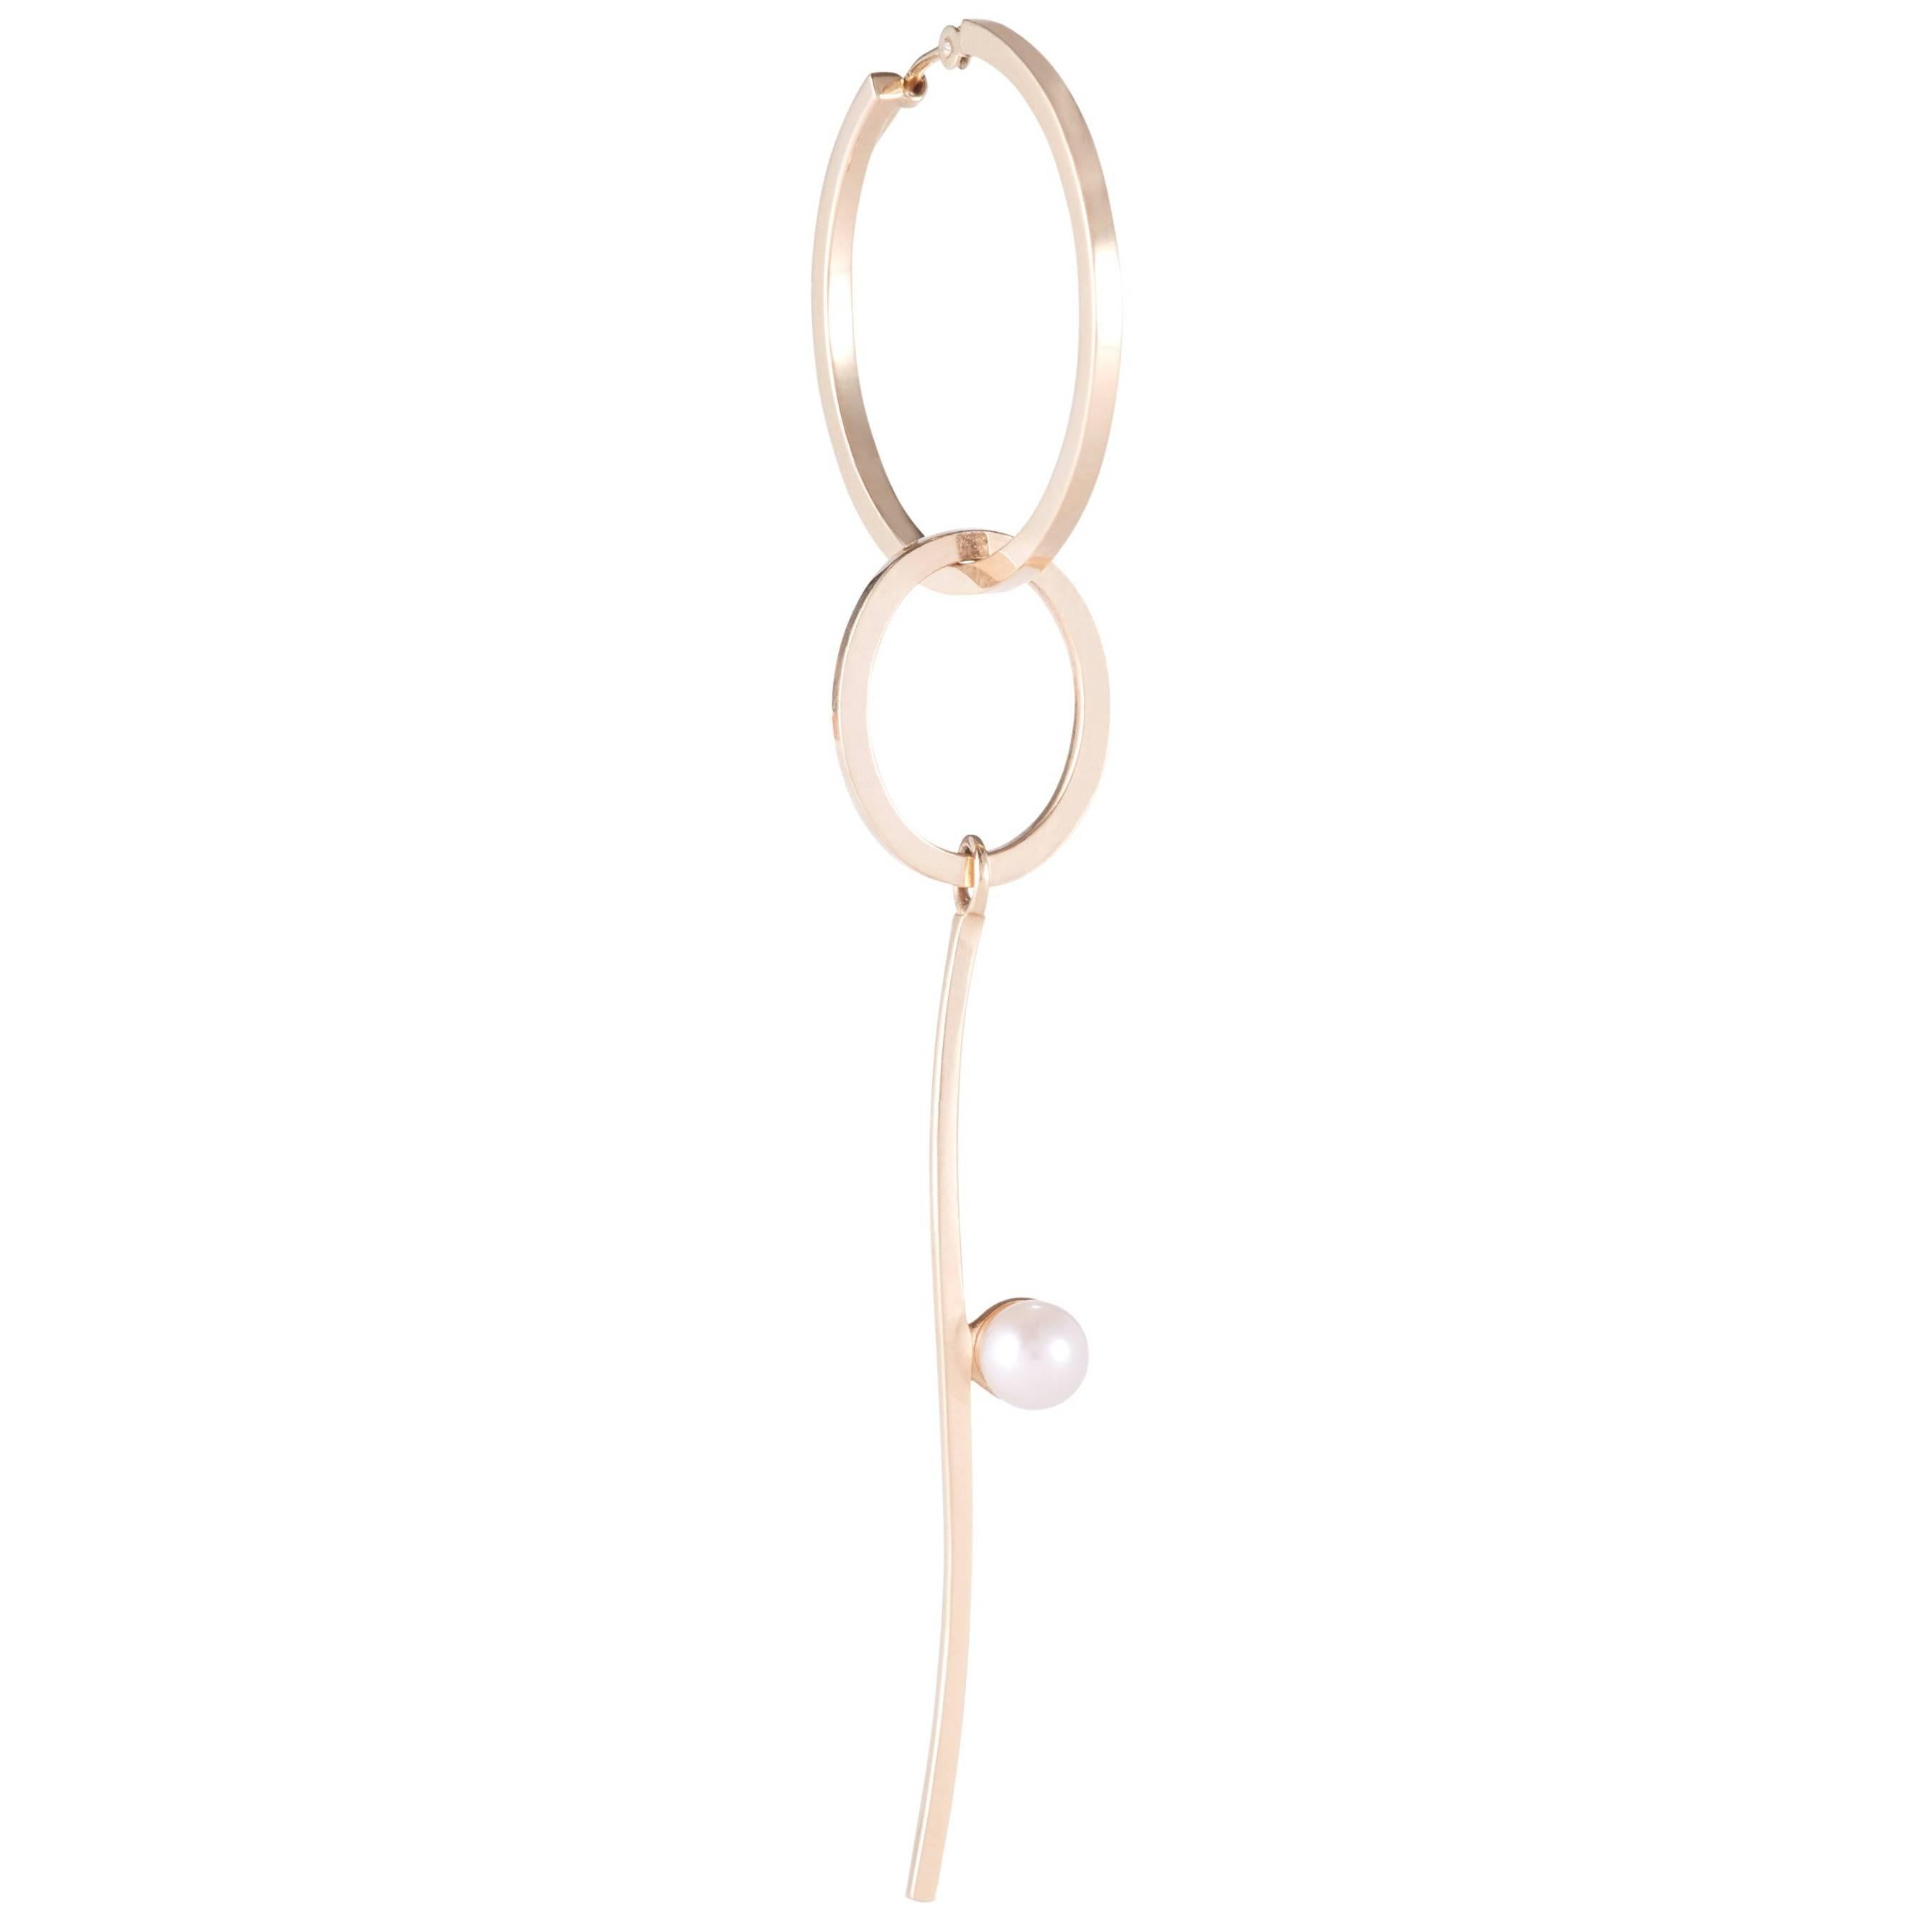 Paige Novick Curved Bar Single Statement Yellow Gold Earring with Pearl Detail For Sale